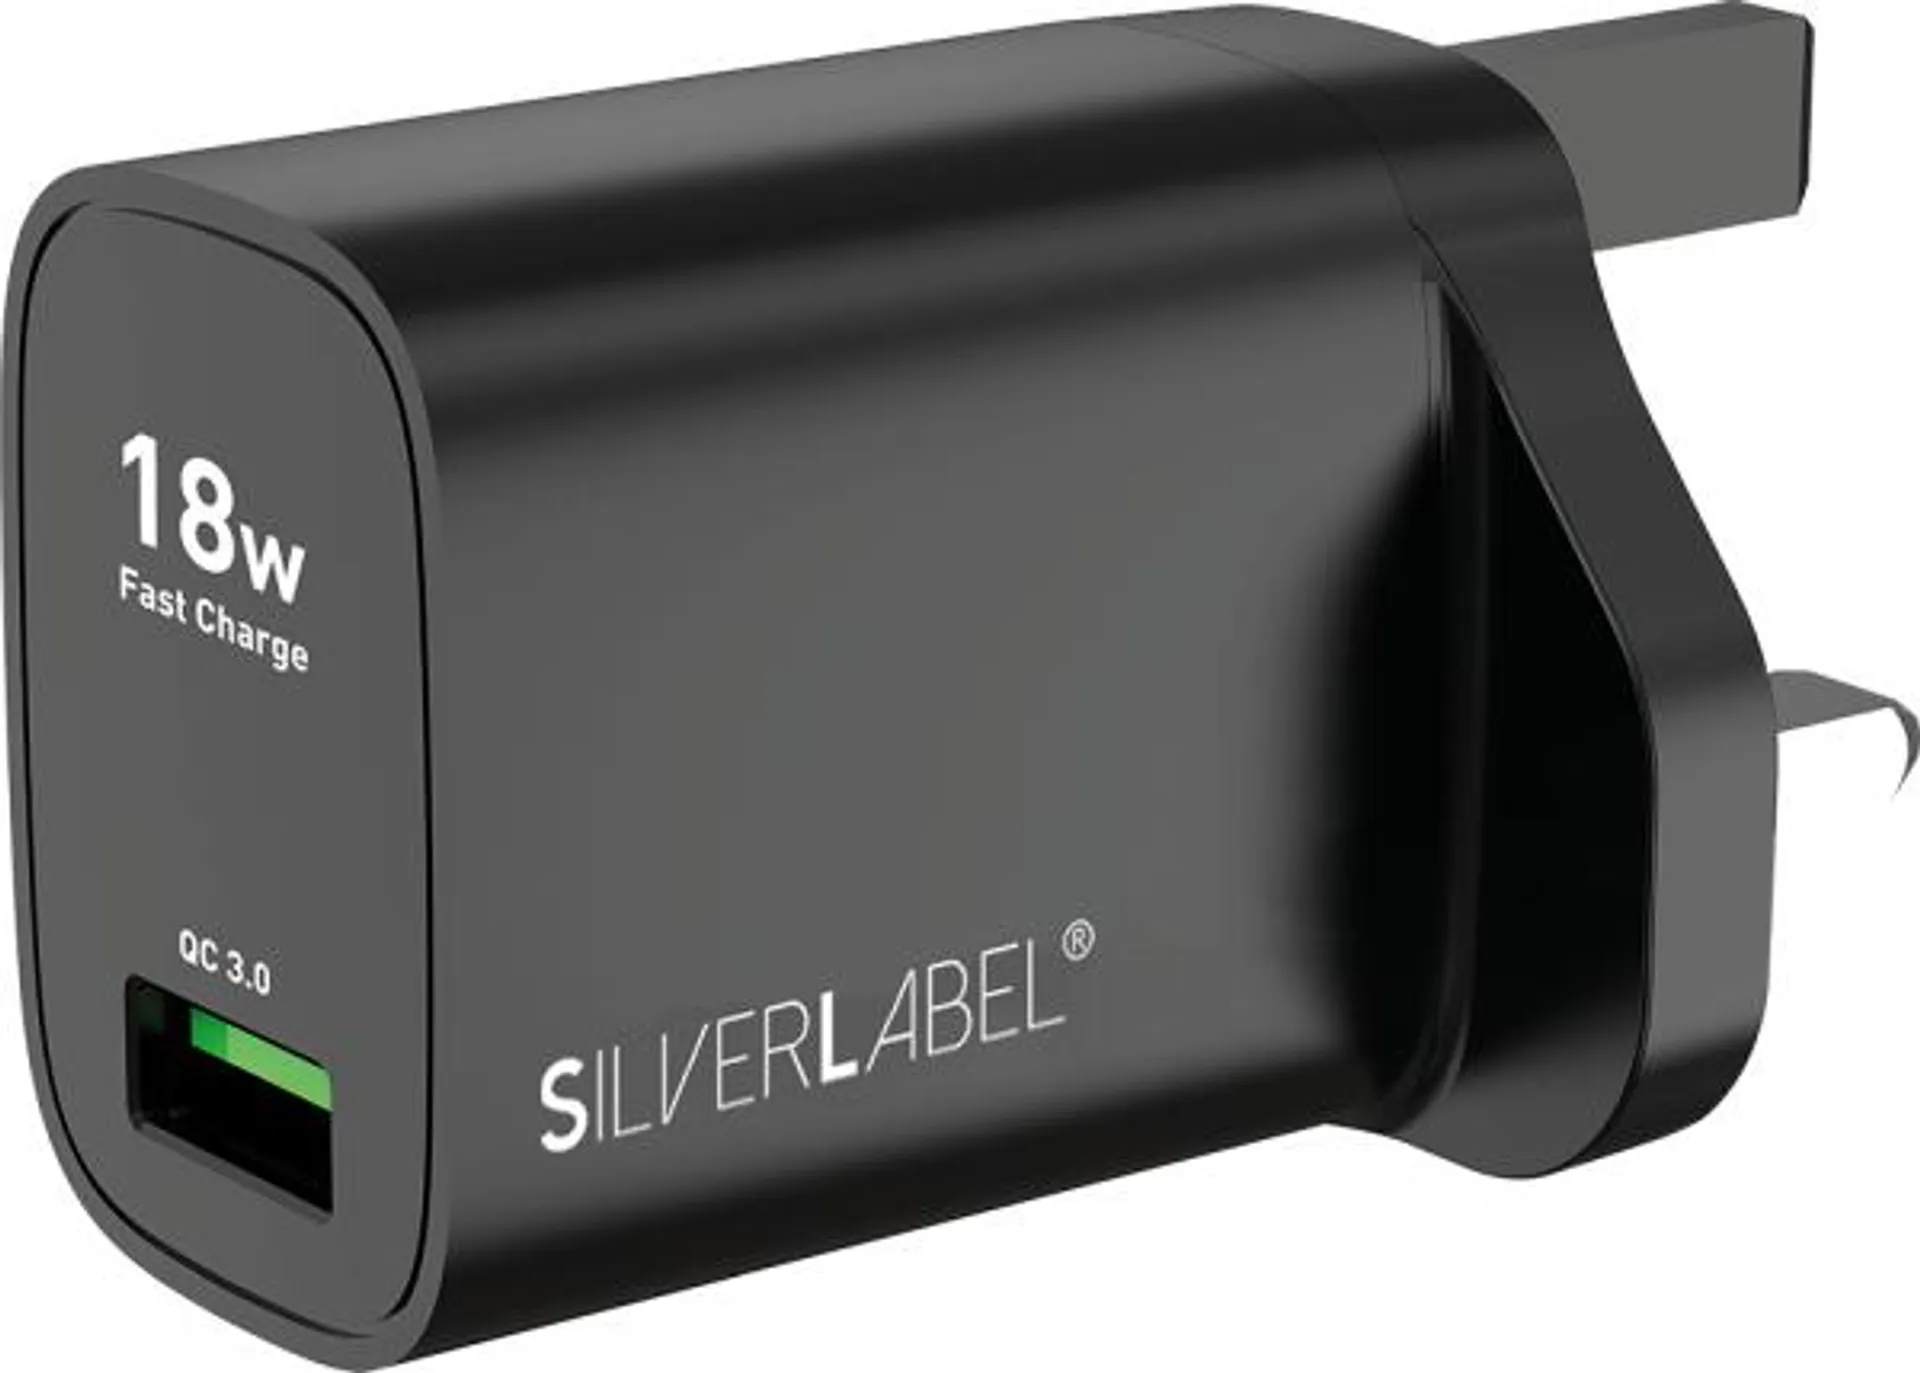 SilverLabel Charger and USB-C Cable Bundle